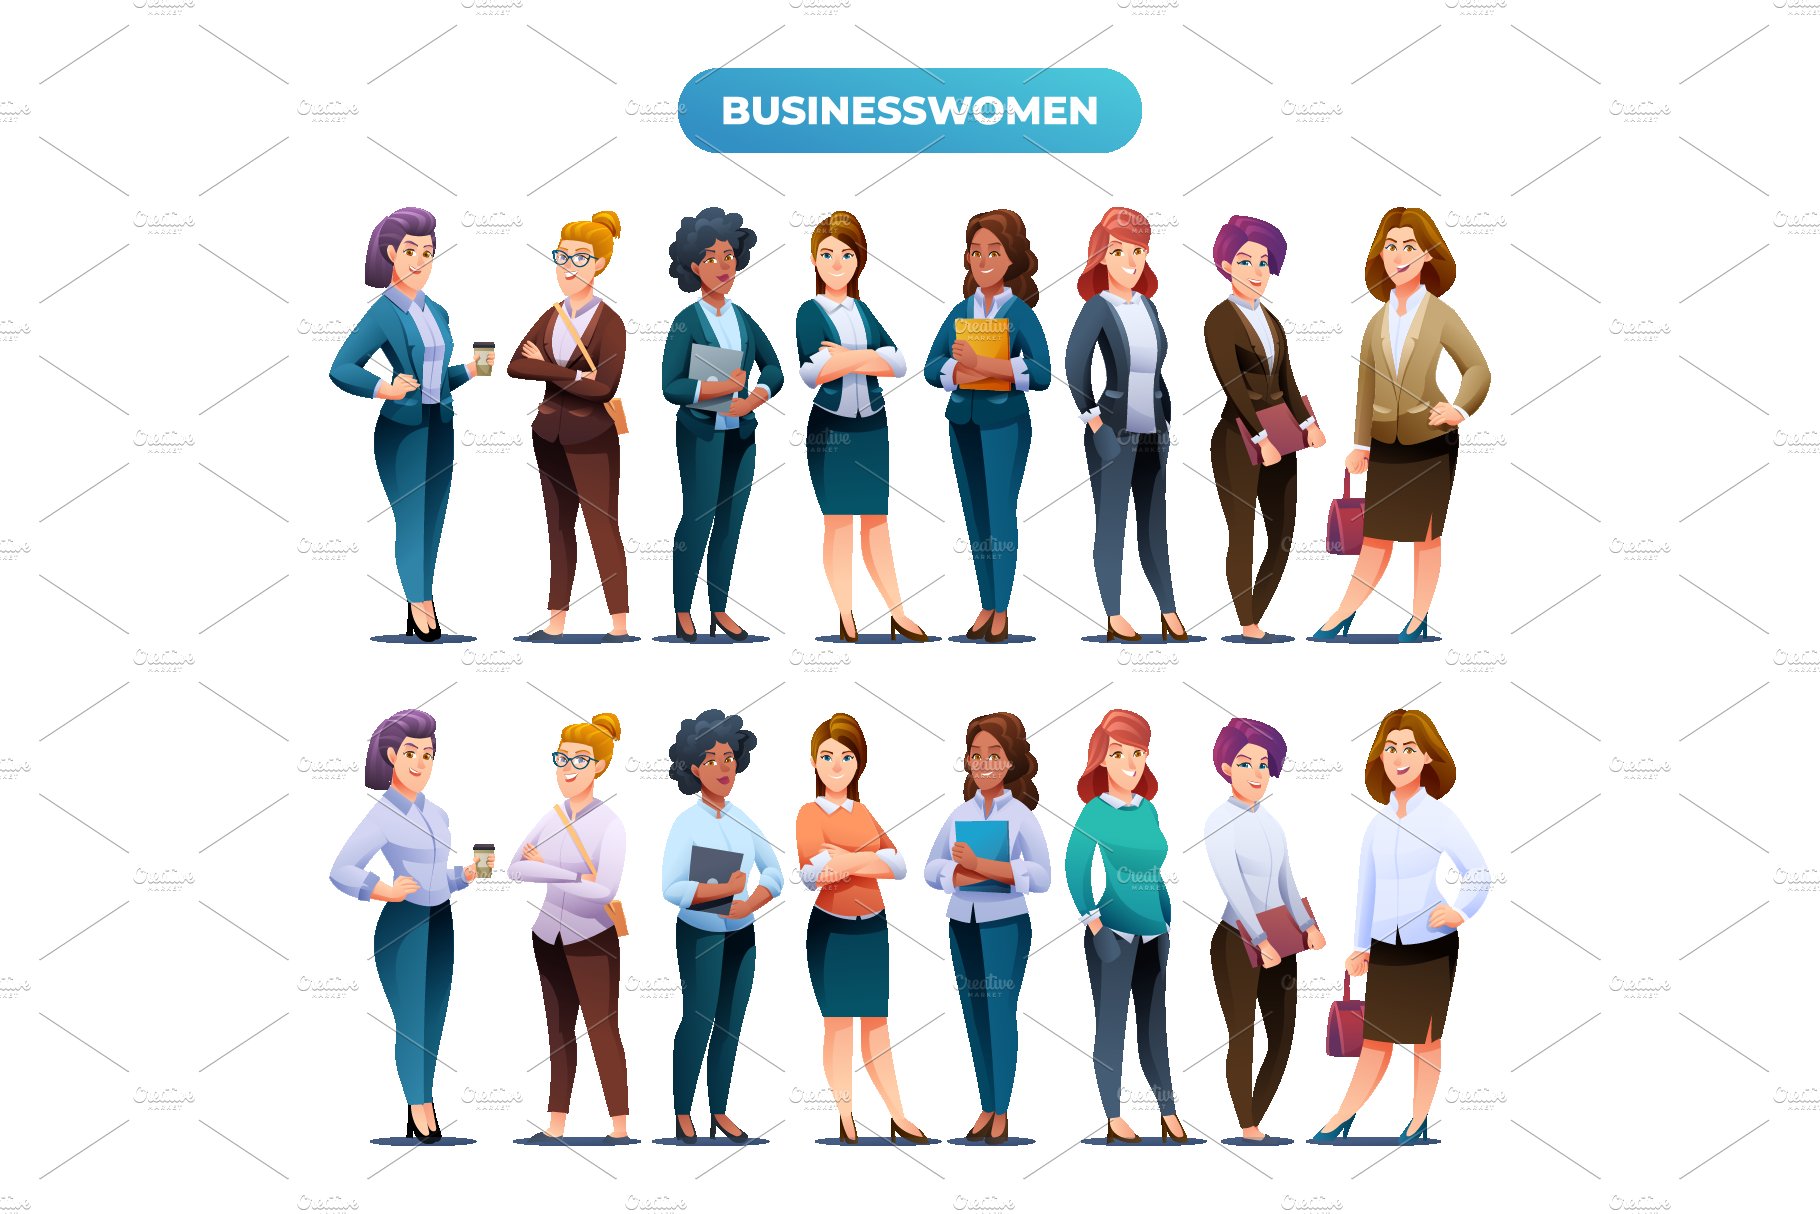 A group of business women standing in a row.